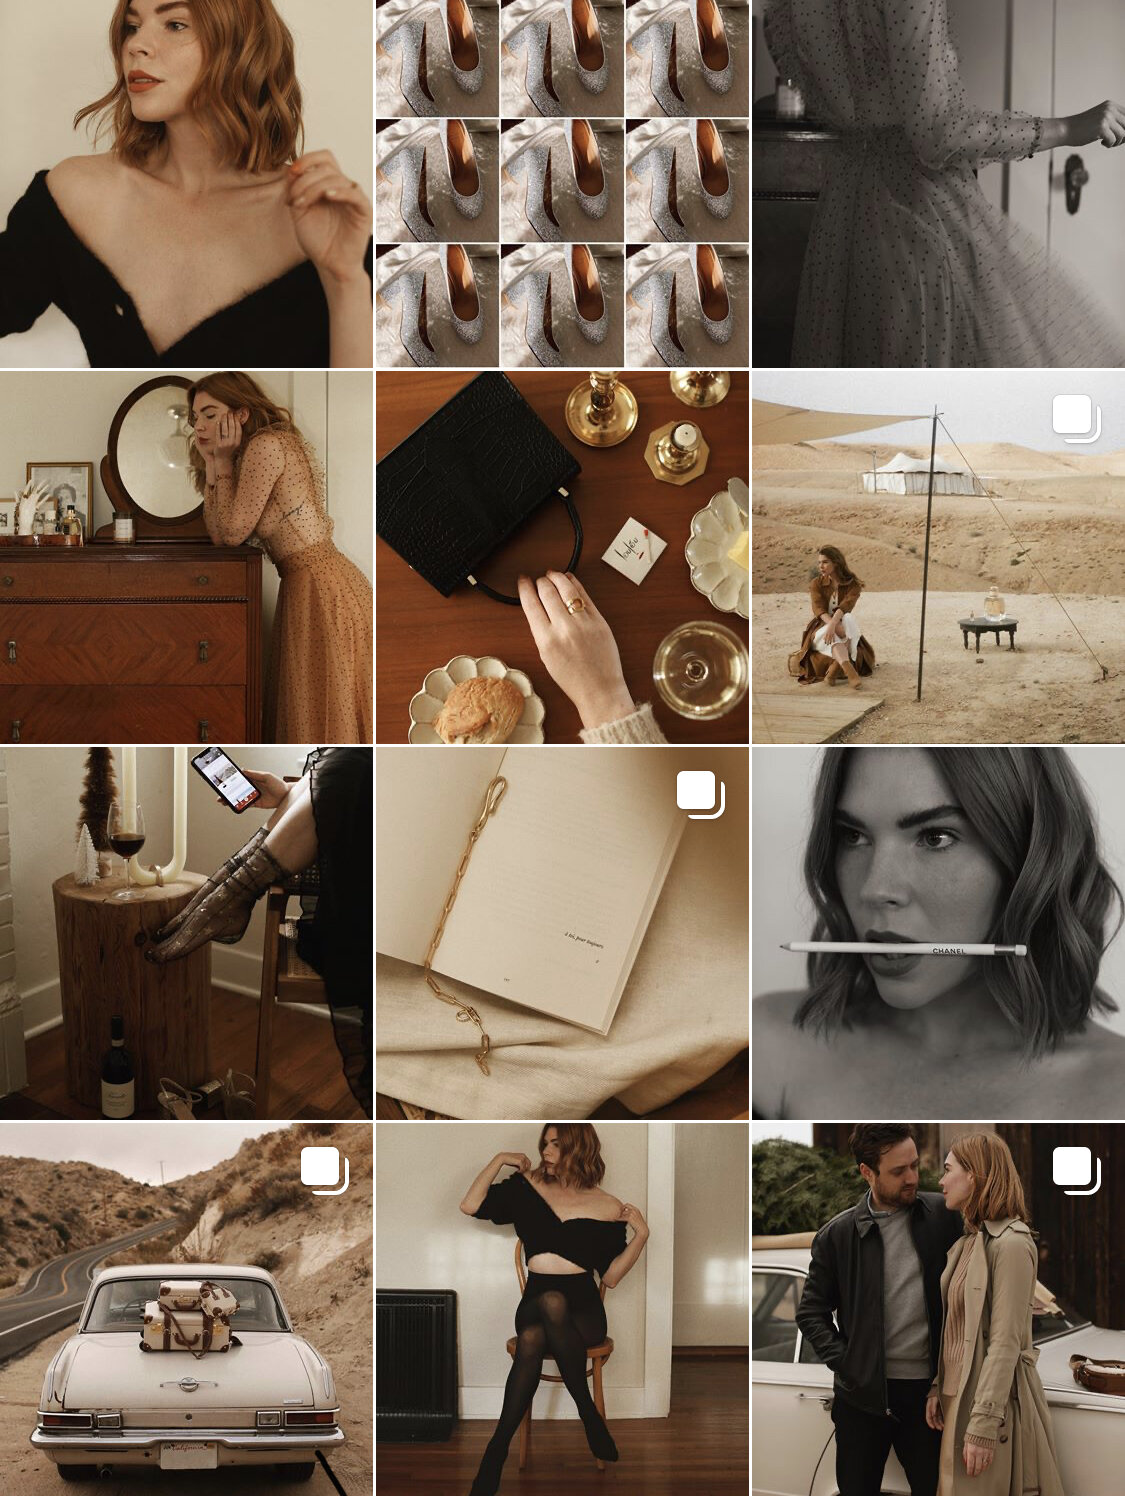 How to Get a Cohesive Instagram Feed